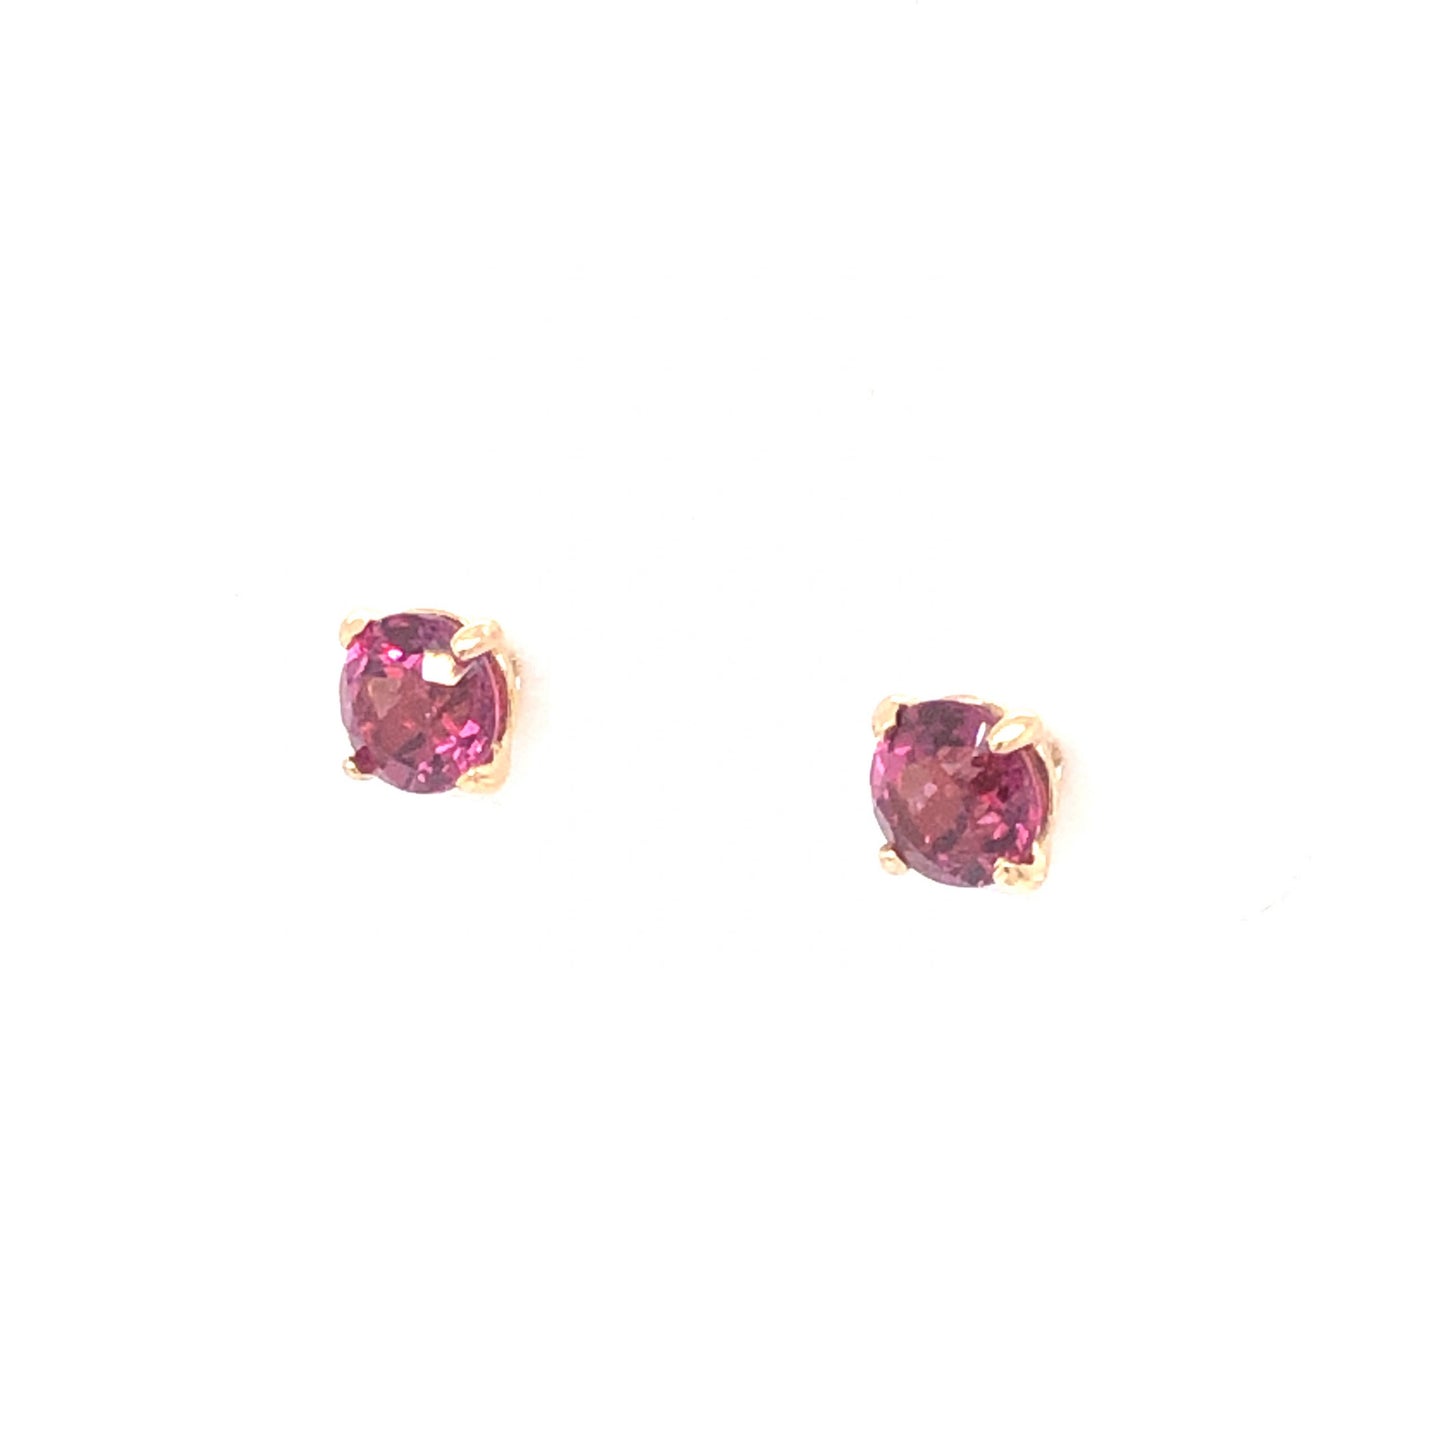 Round Pink Tourmaline Earrings in 14k Yellow Gold